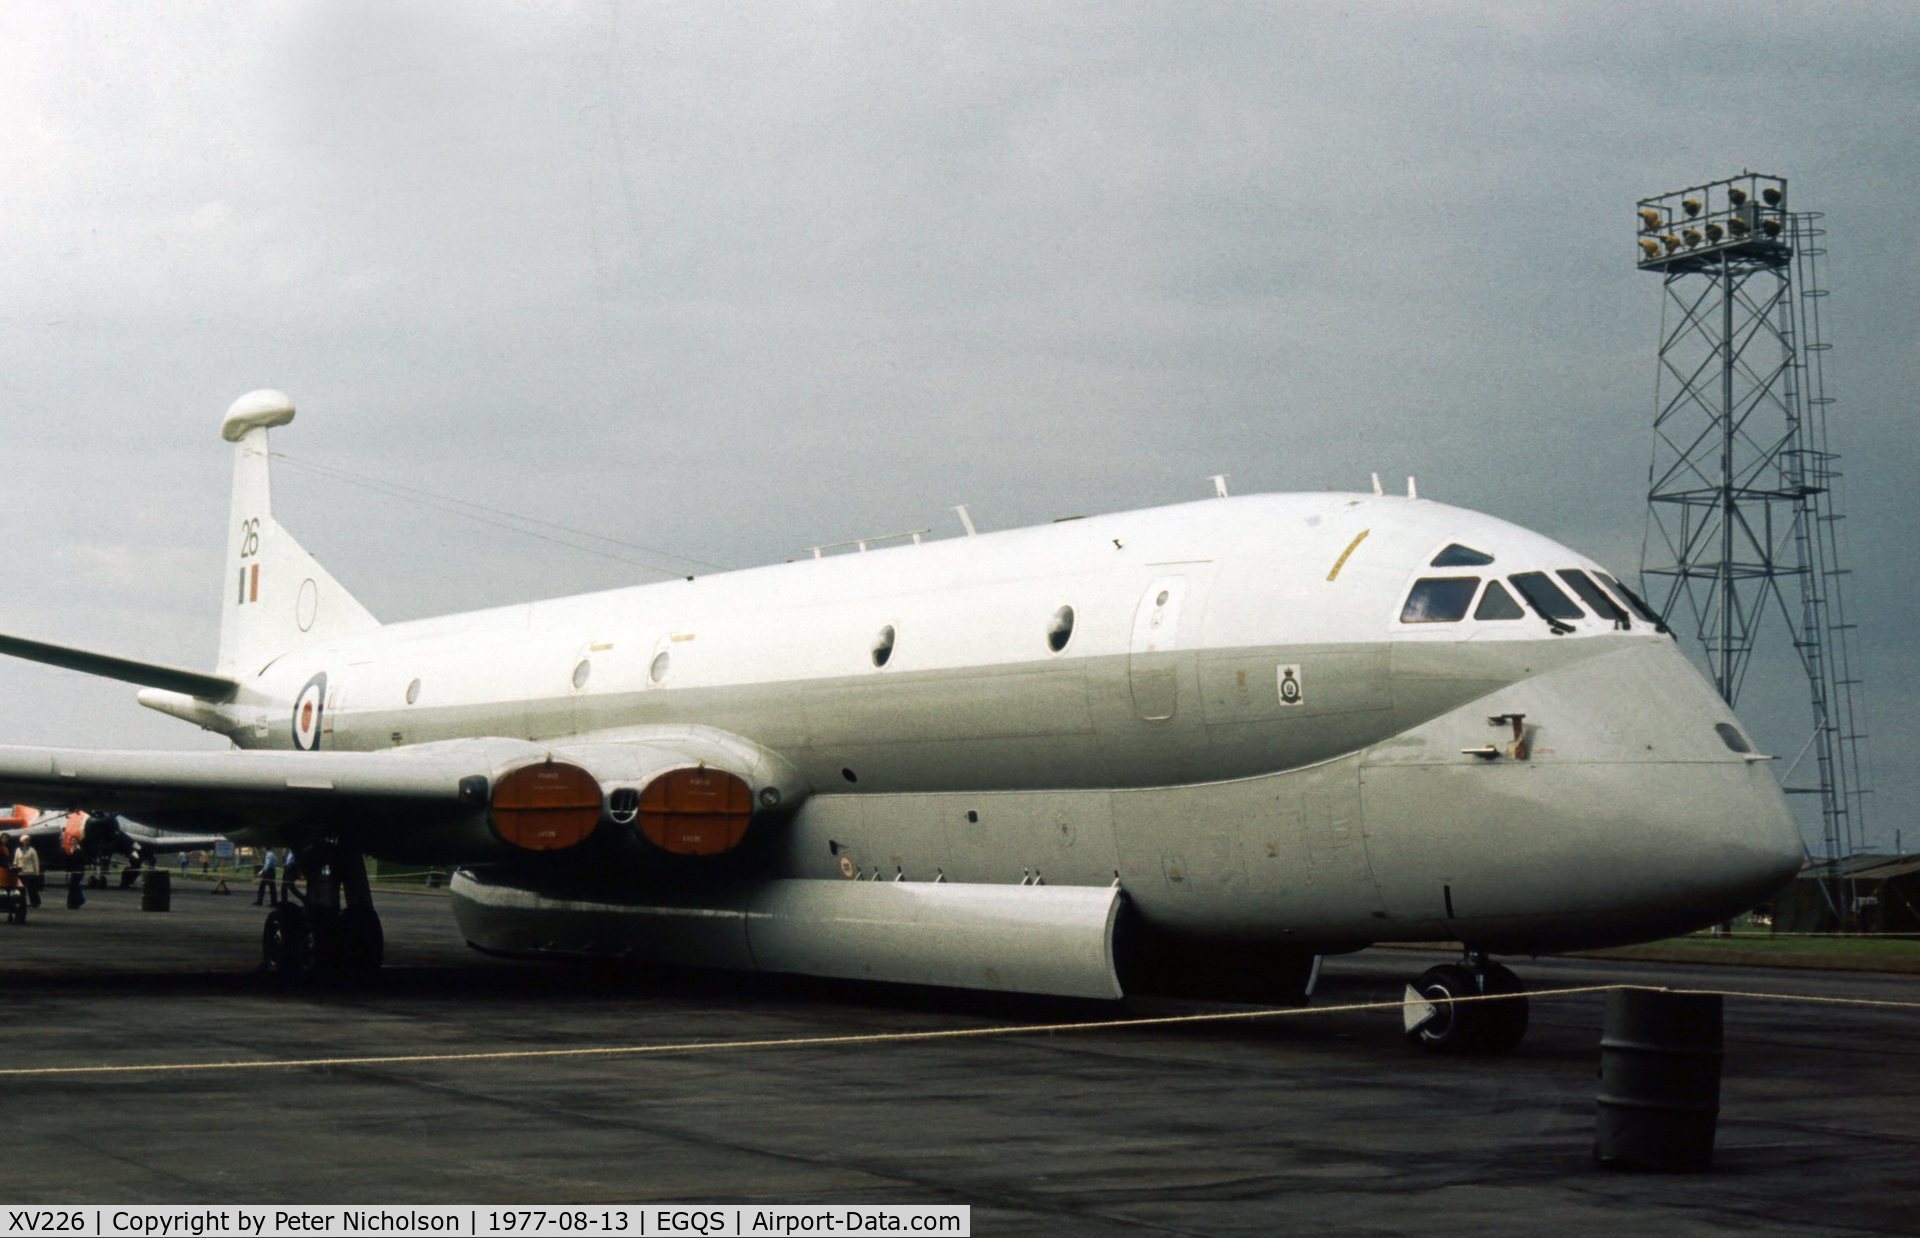 XV226, 1968 Hawker Siddeley Nimrod MR.1 C/N 8001, Nimrod MR.1 in the static park at the 1977 RAF Lossiemouth Open Day.